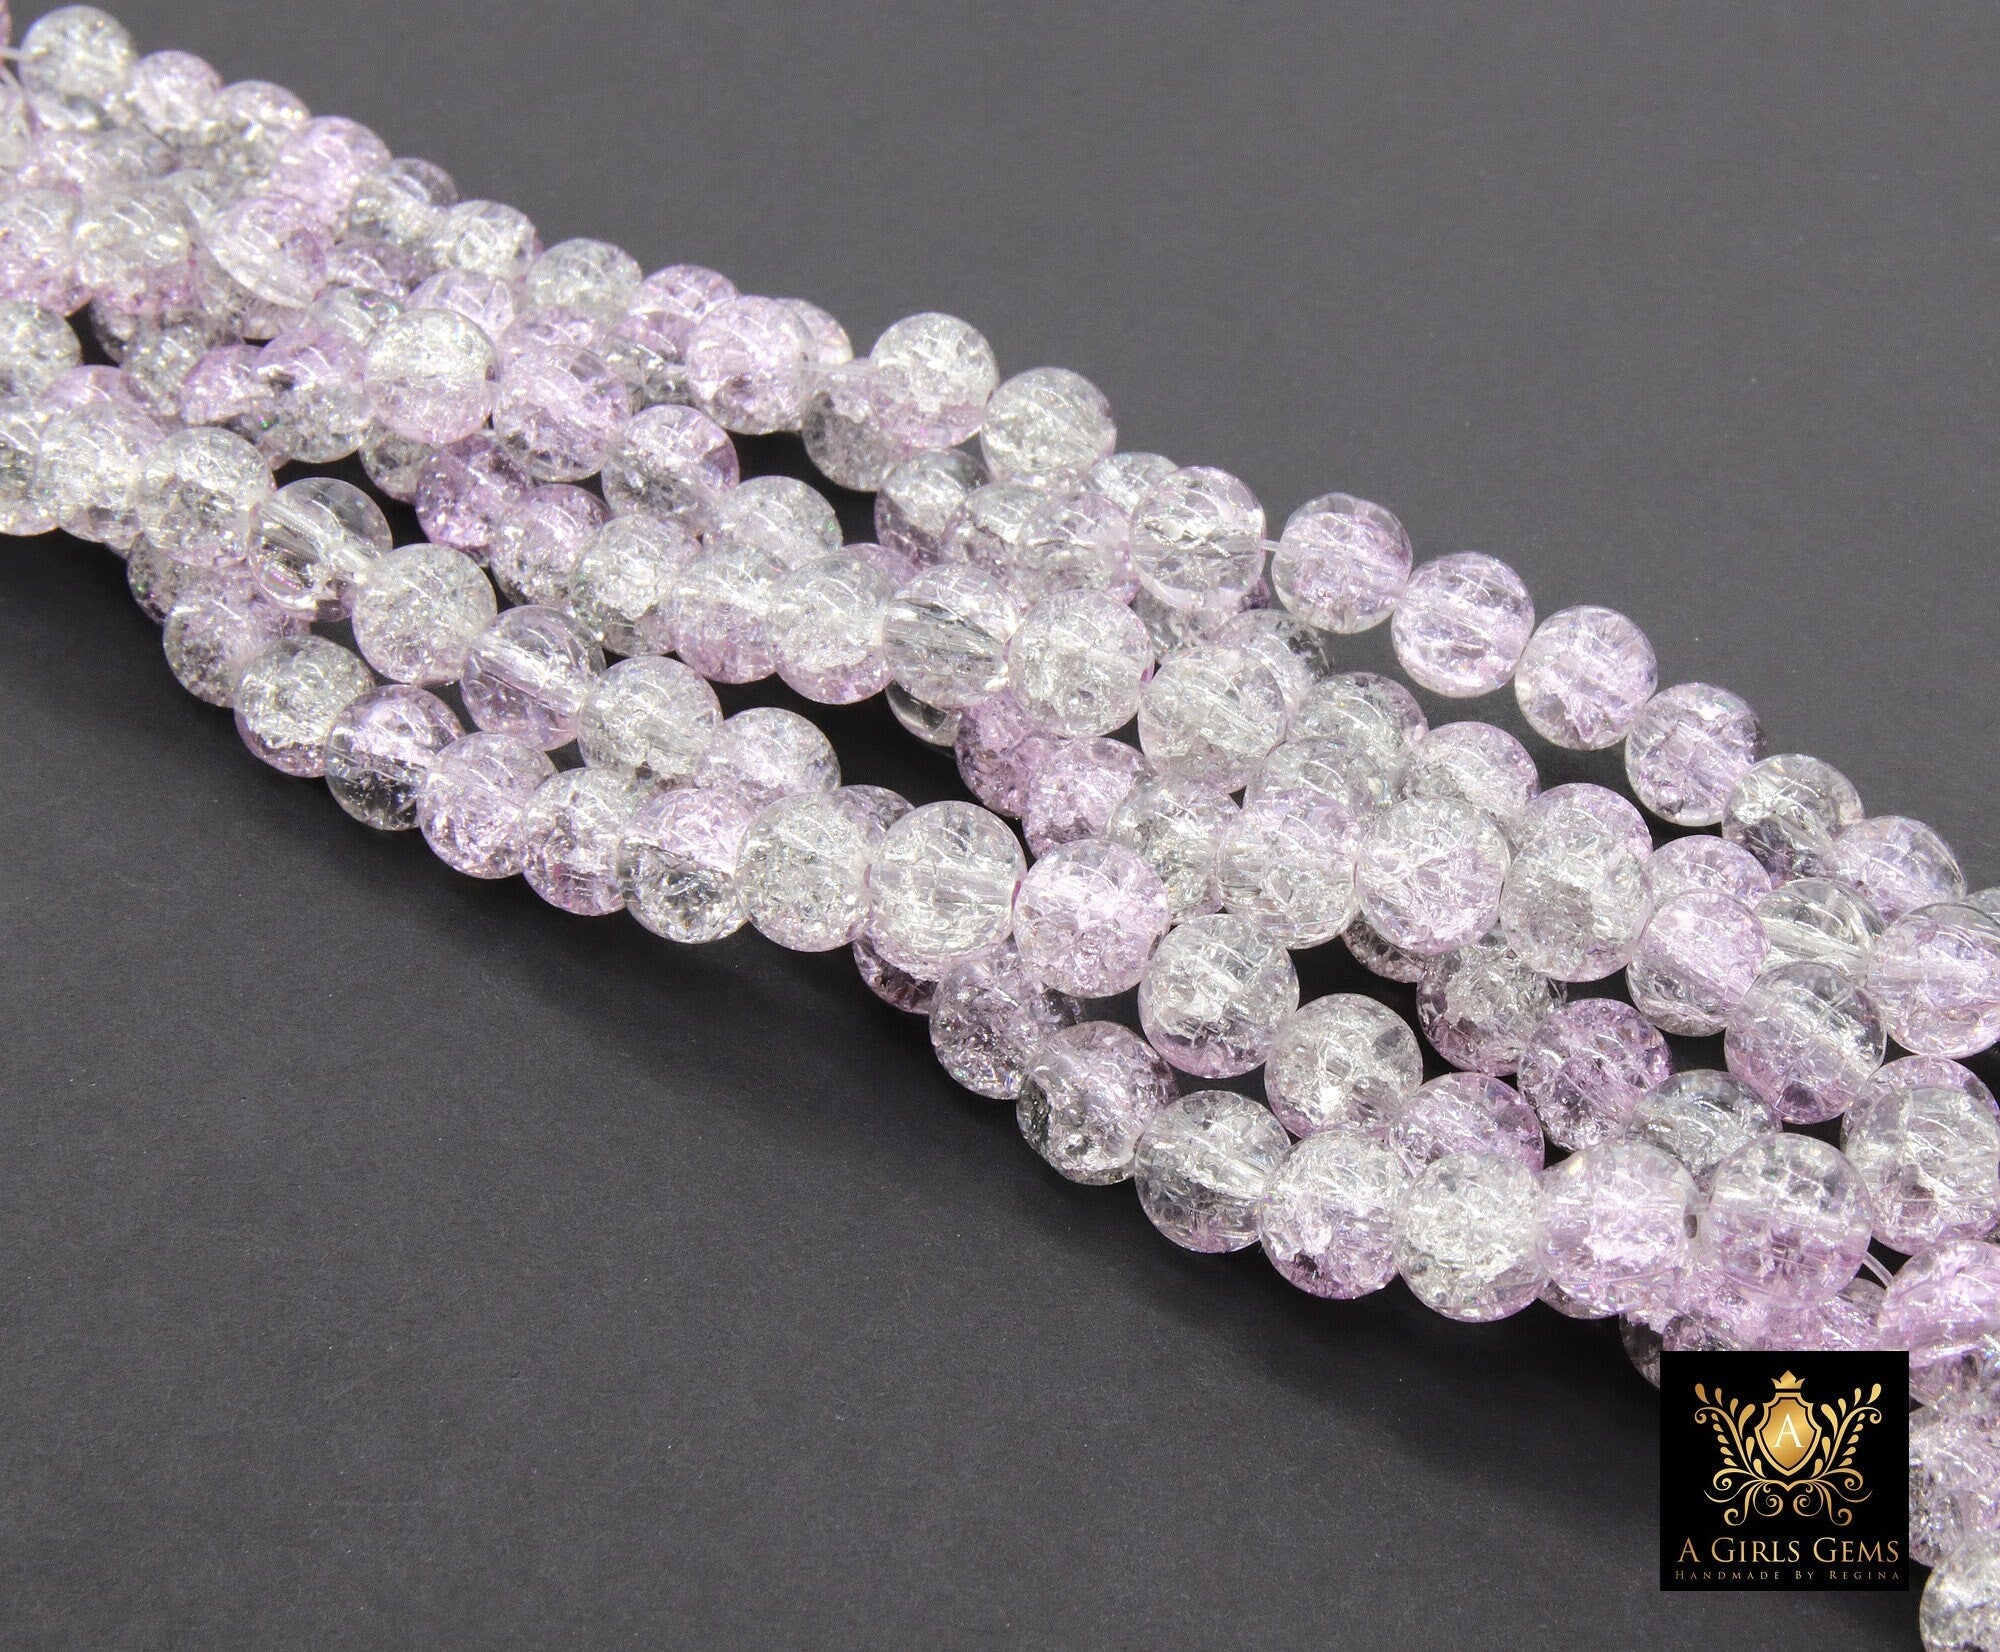 Clear and Purple Round Crystal Beads, Crackled Shimmery Glass Beads BS #122, size 8 mm, 31 inch Jewelry Bead Strands